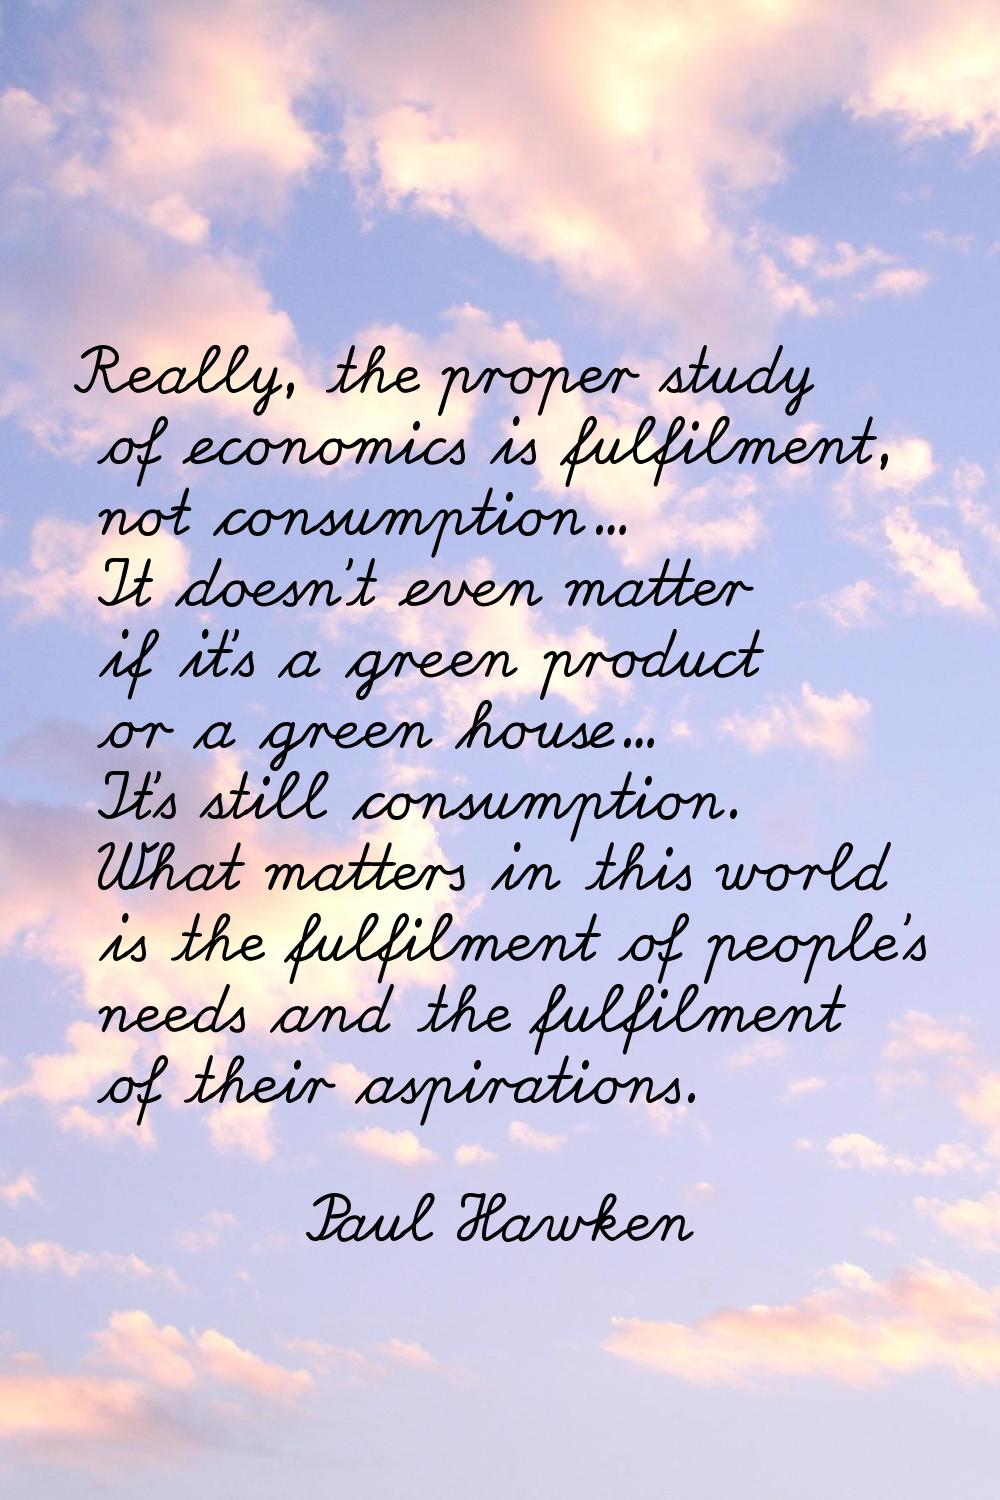 Really, the proper study of economics is fulfilment, not consumption... It doesn't even matter if i